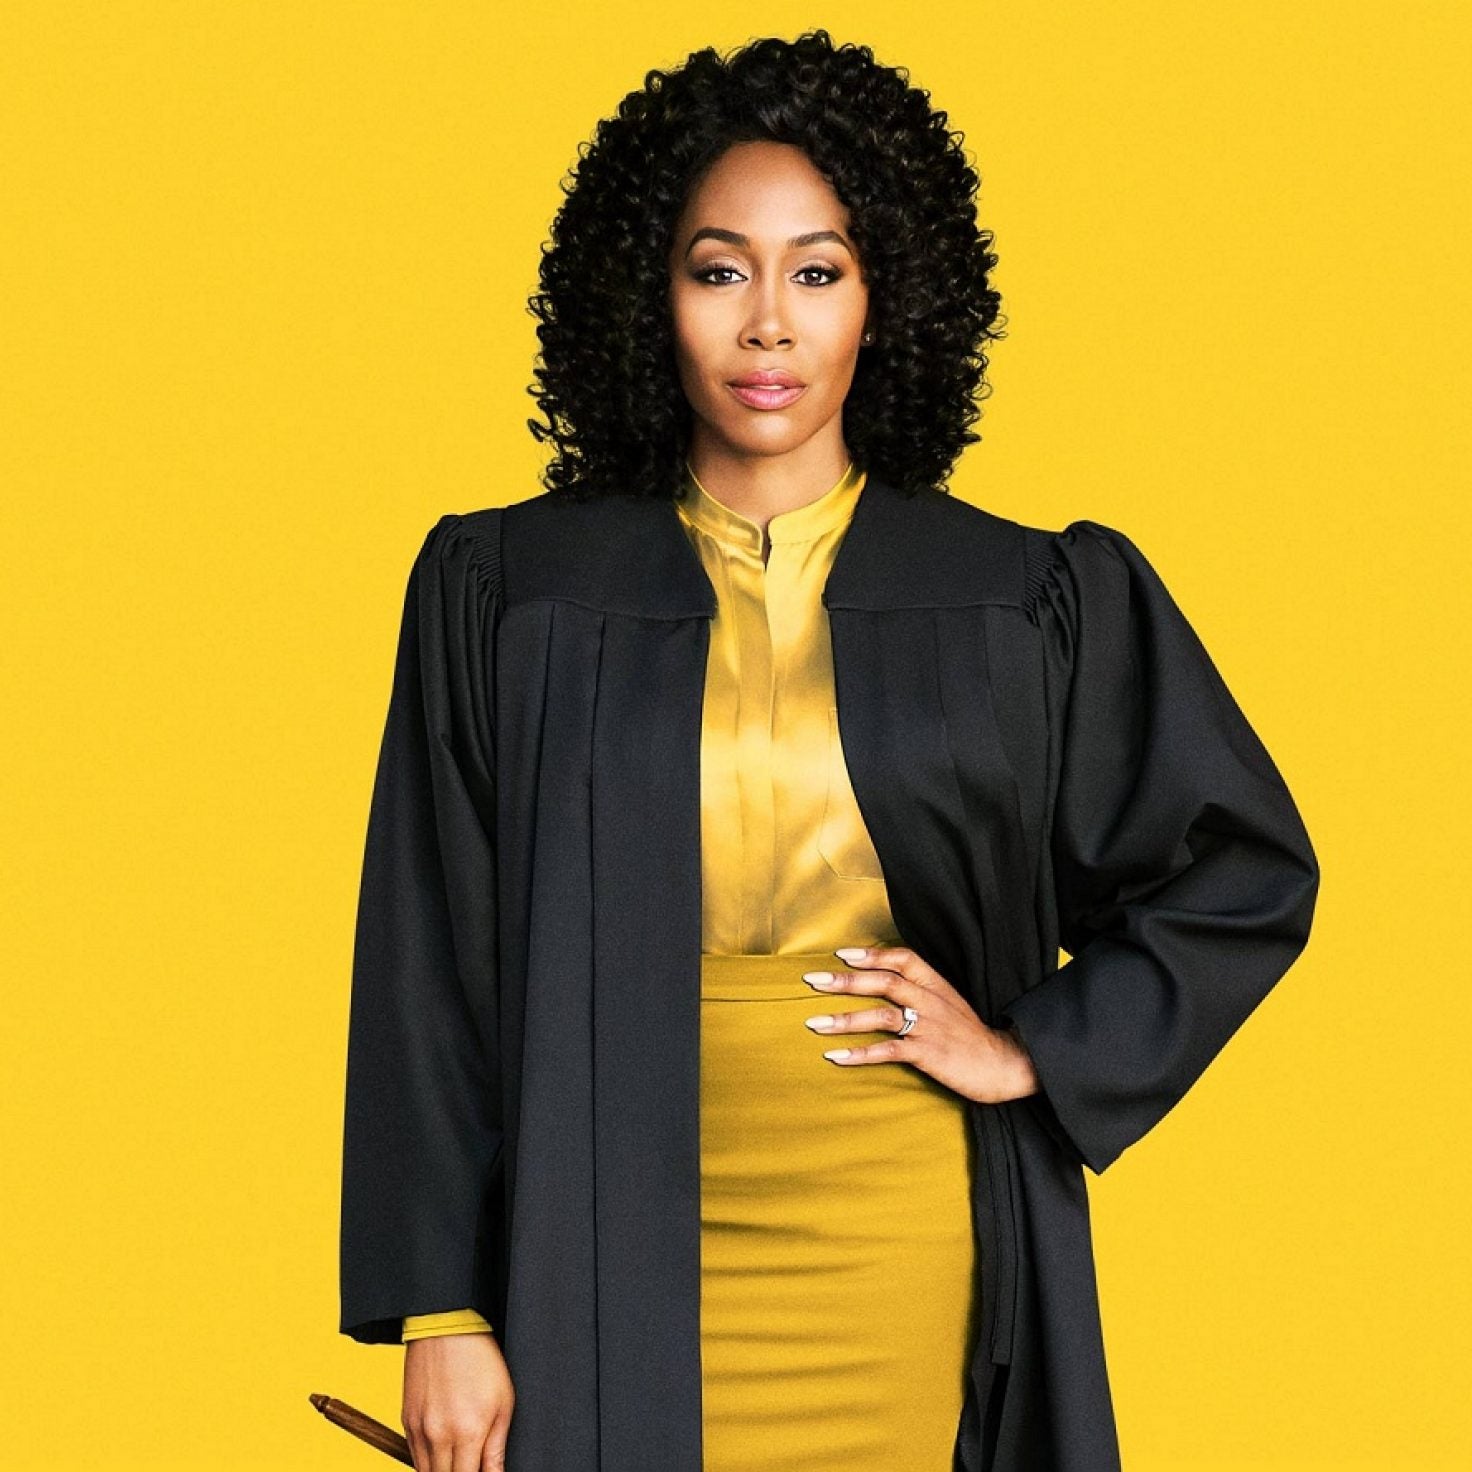 These Fictional Black Women Bosses Will Inspire You To Level Up